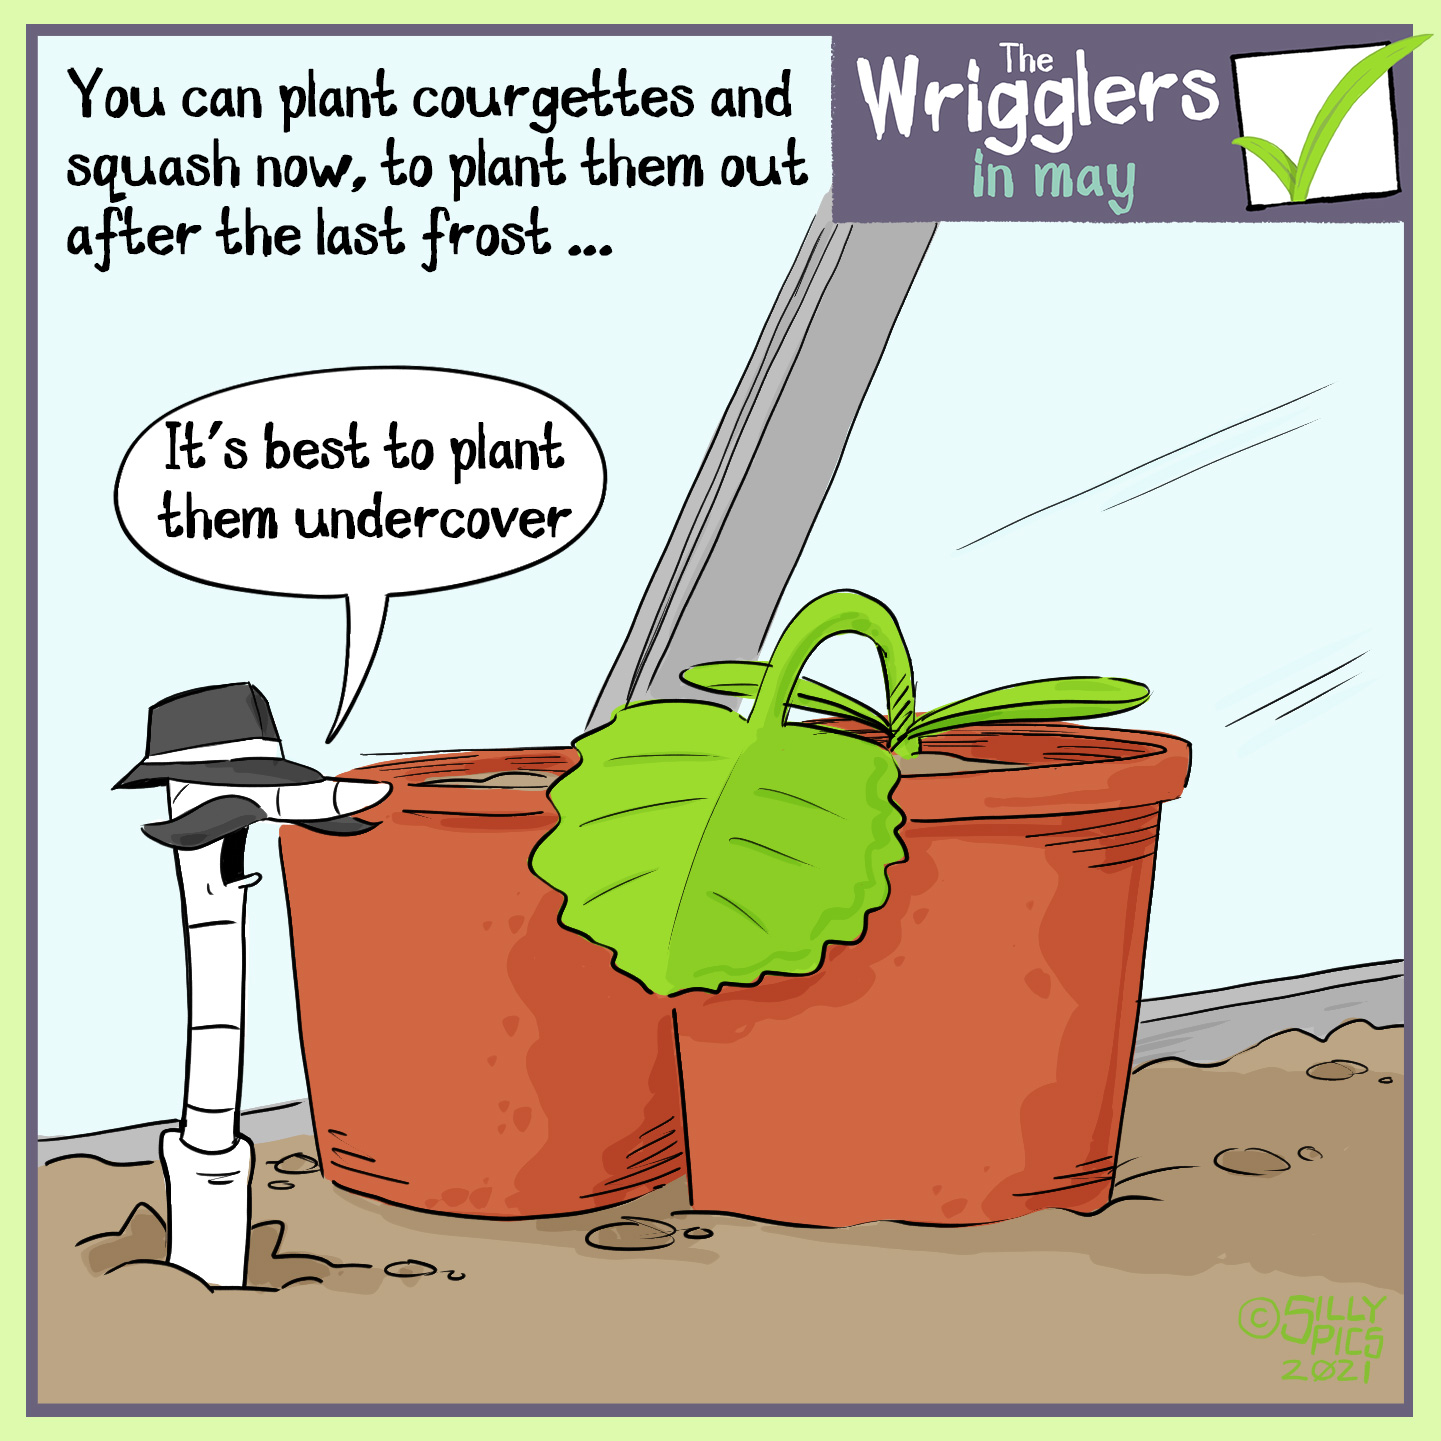 The headline says, “You can plant courgettes and Squash now, to plant them out after the last frost” The cartoon shows a worm with a detective hat and moustache in the soil next to a courgette plant under glass cover. The worm says. “It’s best to plant them under cover.”